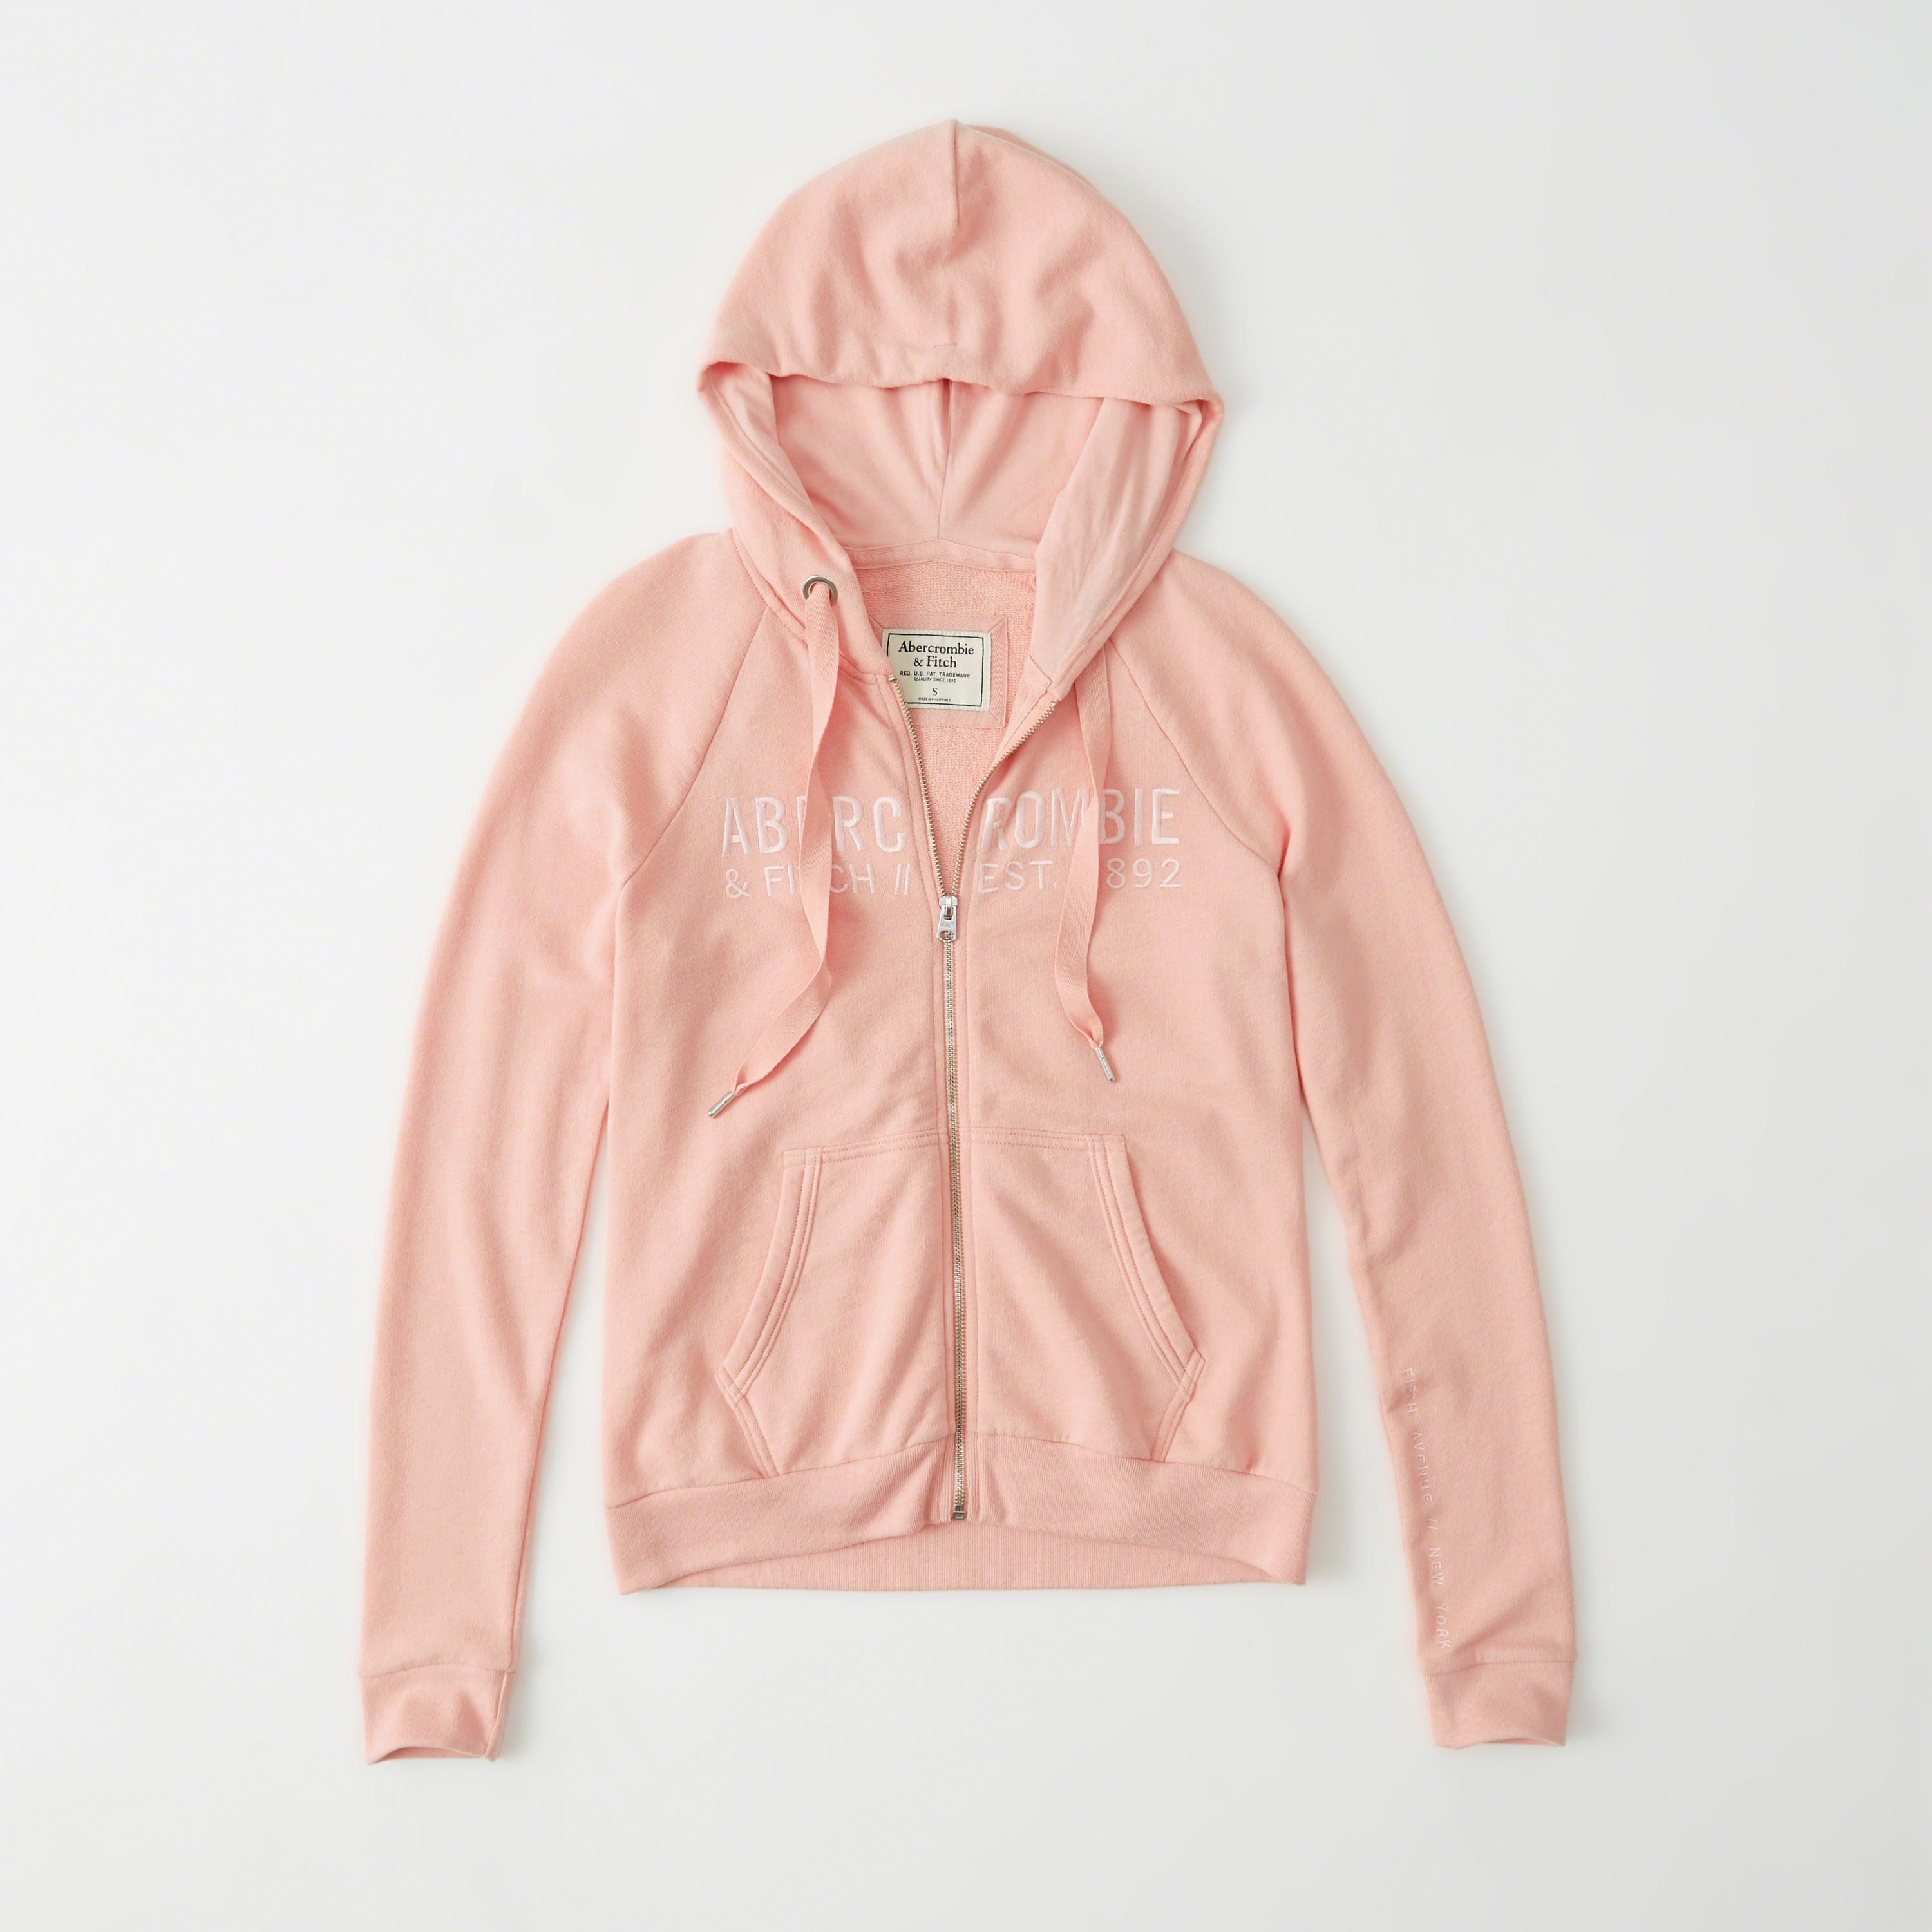 Abercrombie & fitch Logo Graphic Full-zip Hoodie in Pink - Save 37% | Lyst